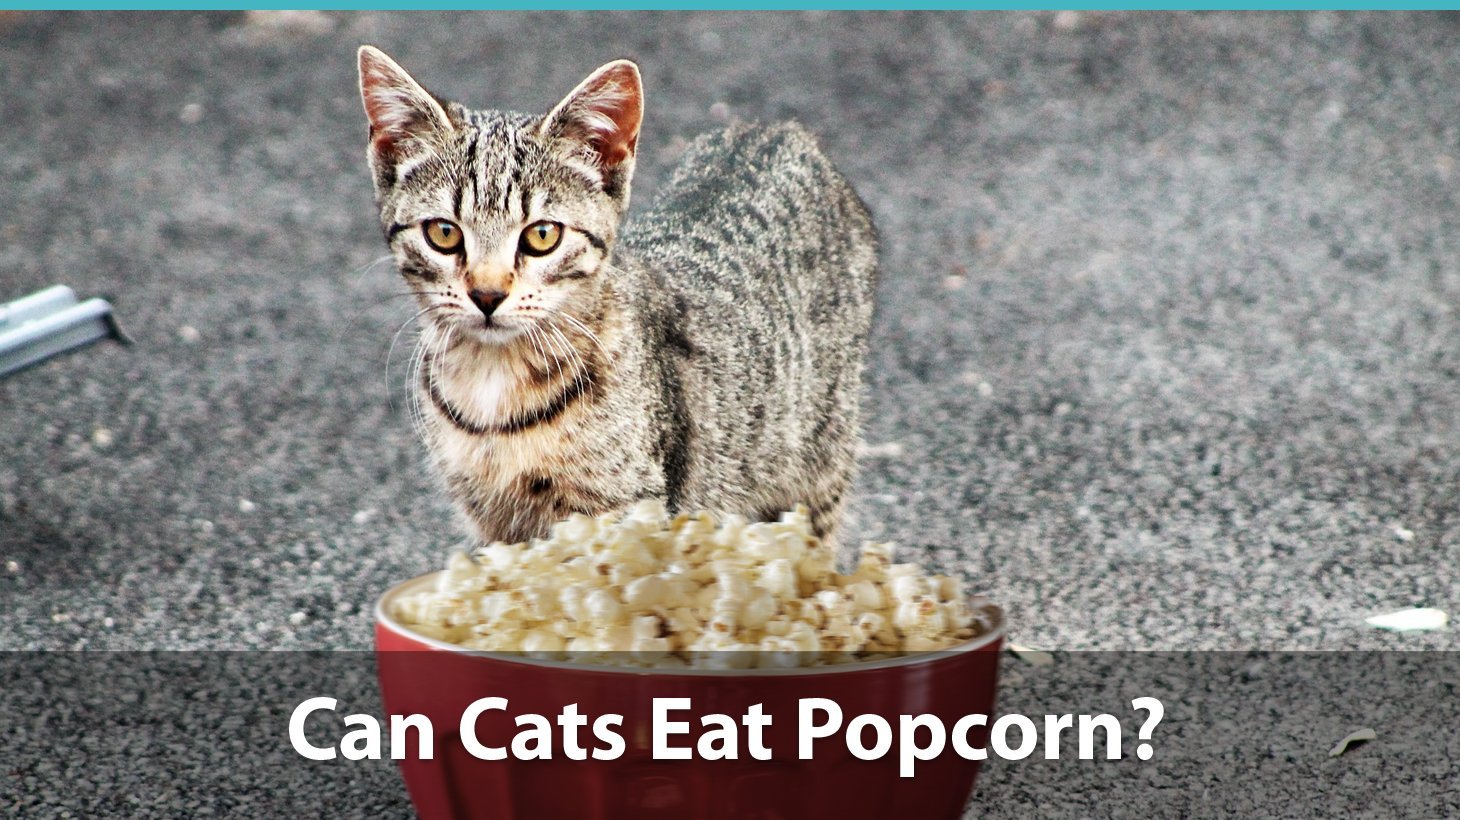 Can Cats Eat Popcorn Or Is It Bad For Them? - Catological